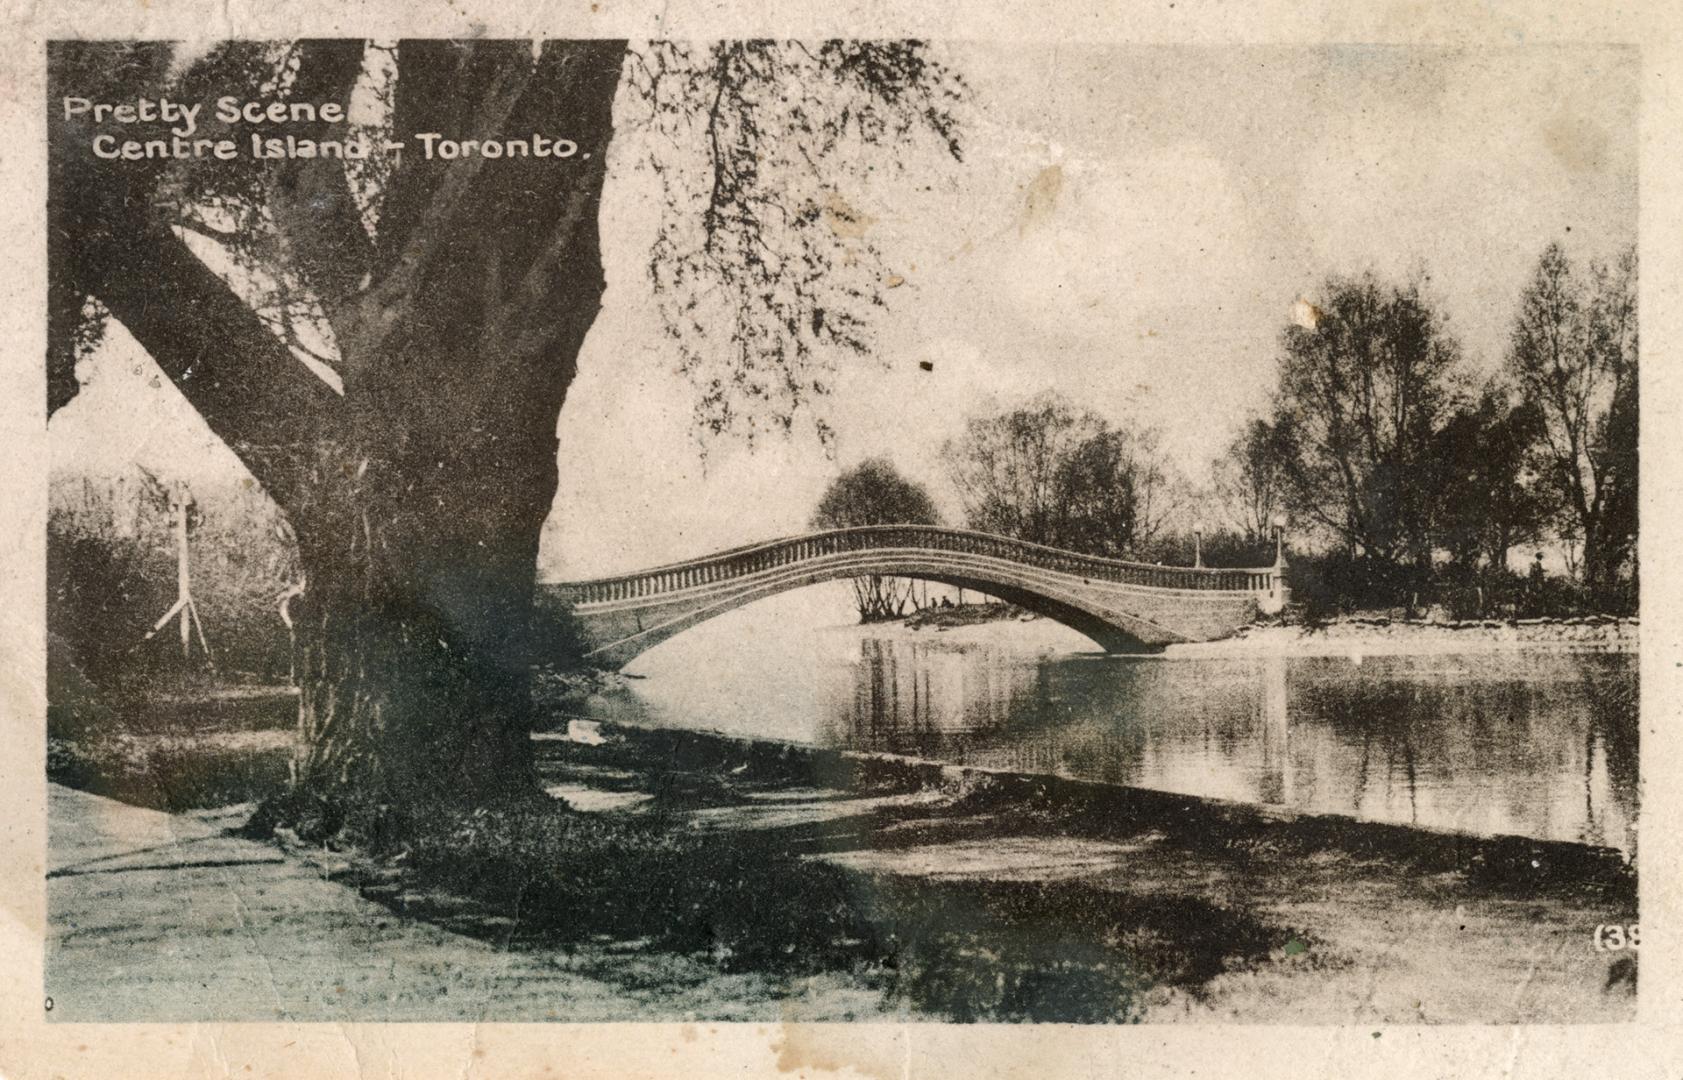 Black and white photograph of a curved bridge over a narrow body of water.